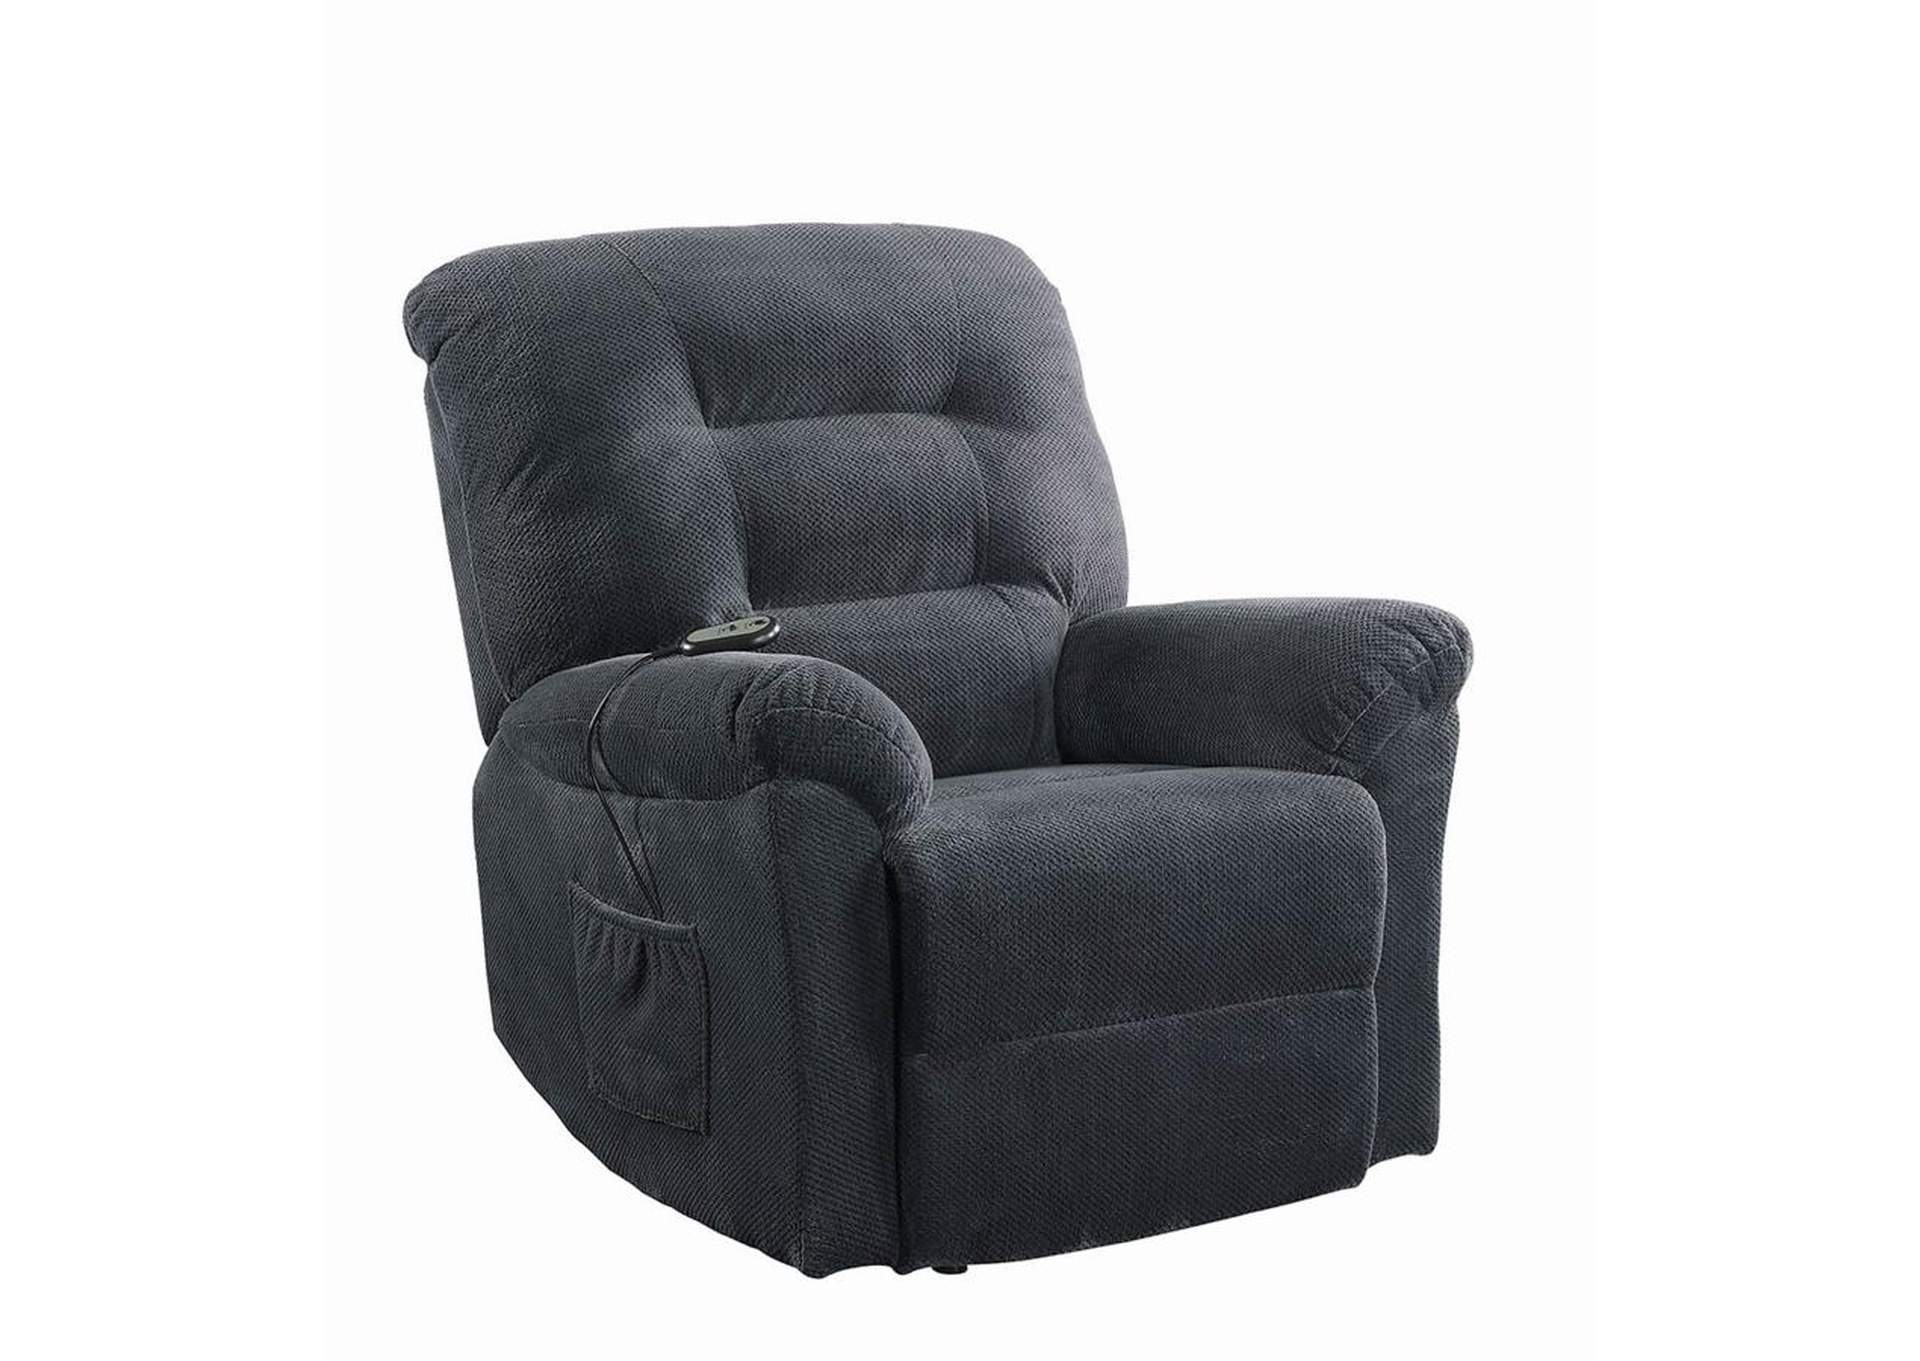 Upholstered Power Lift Recliner Charcoal,Coaster Furniture